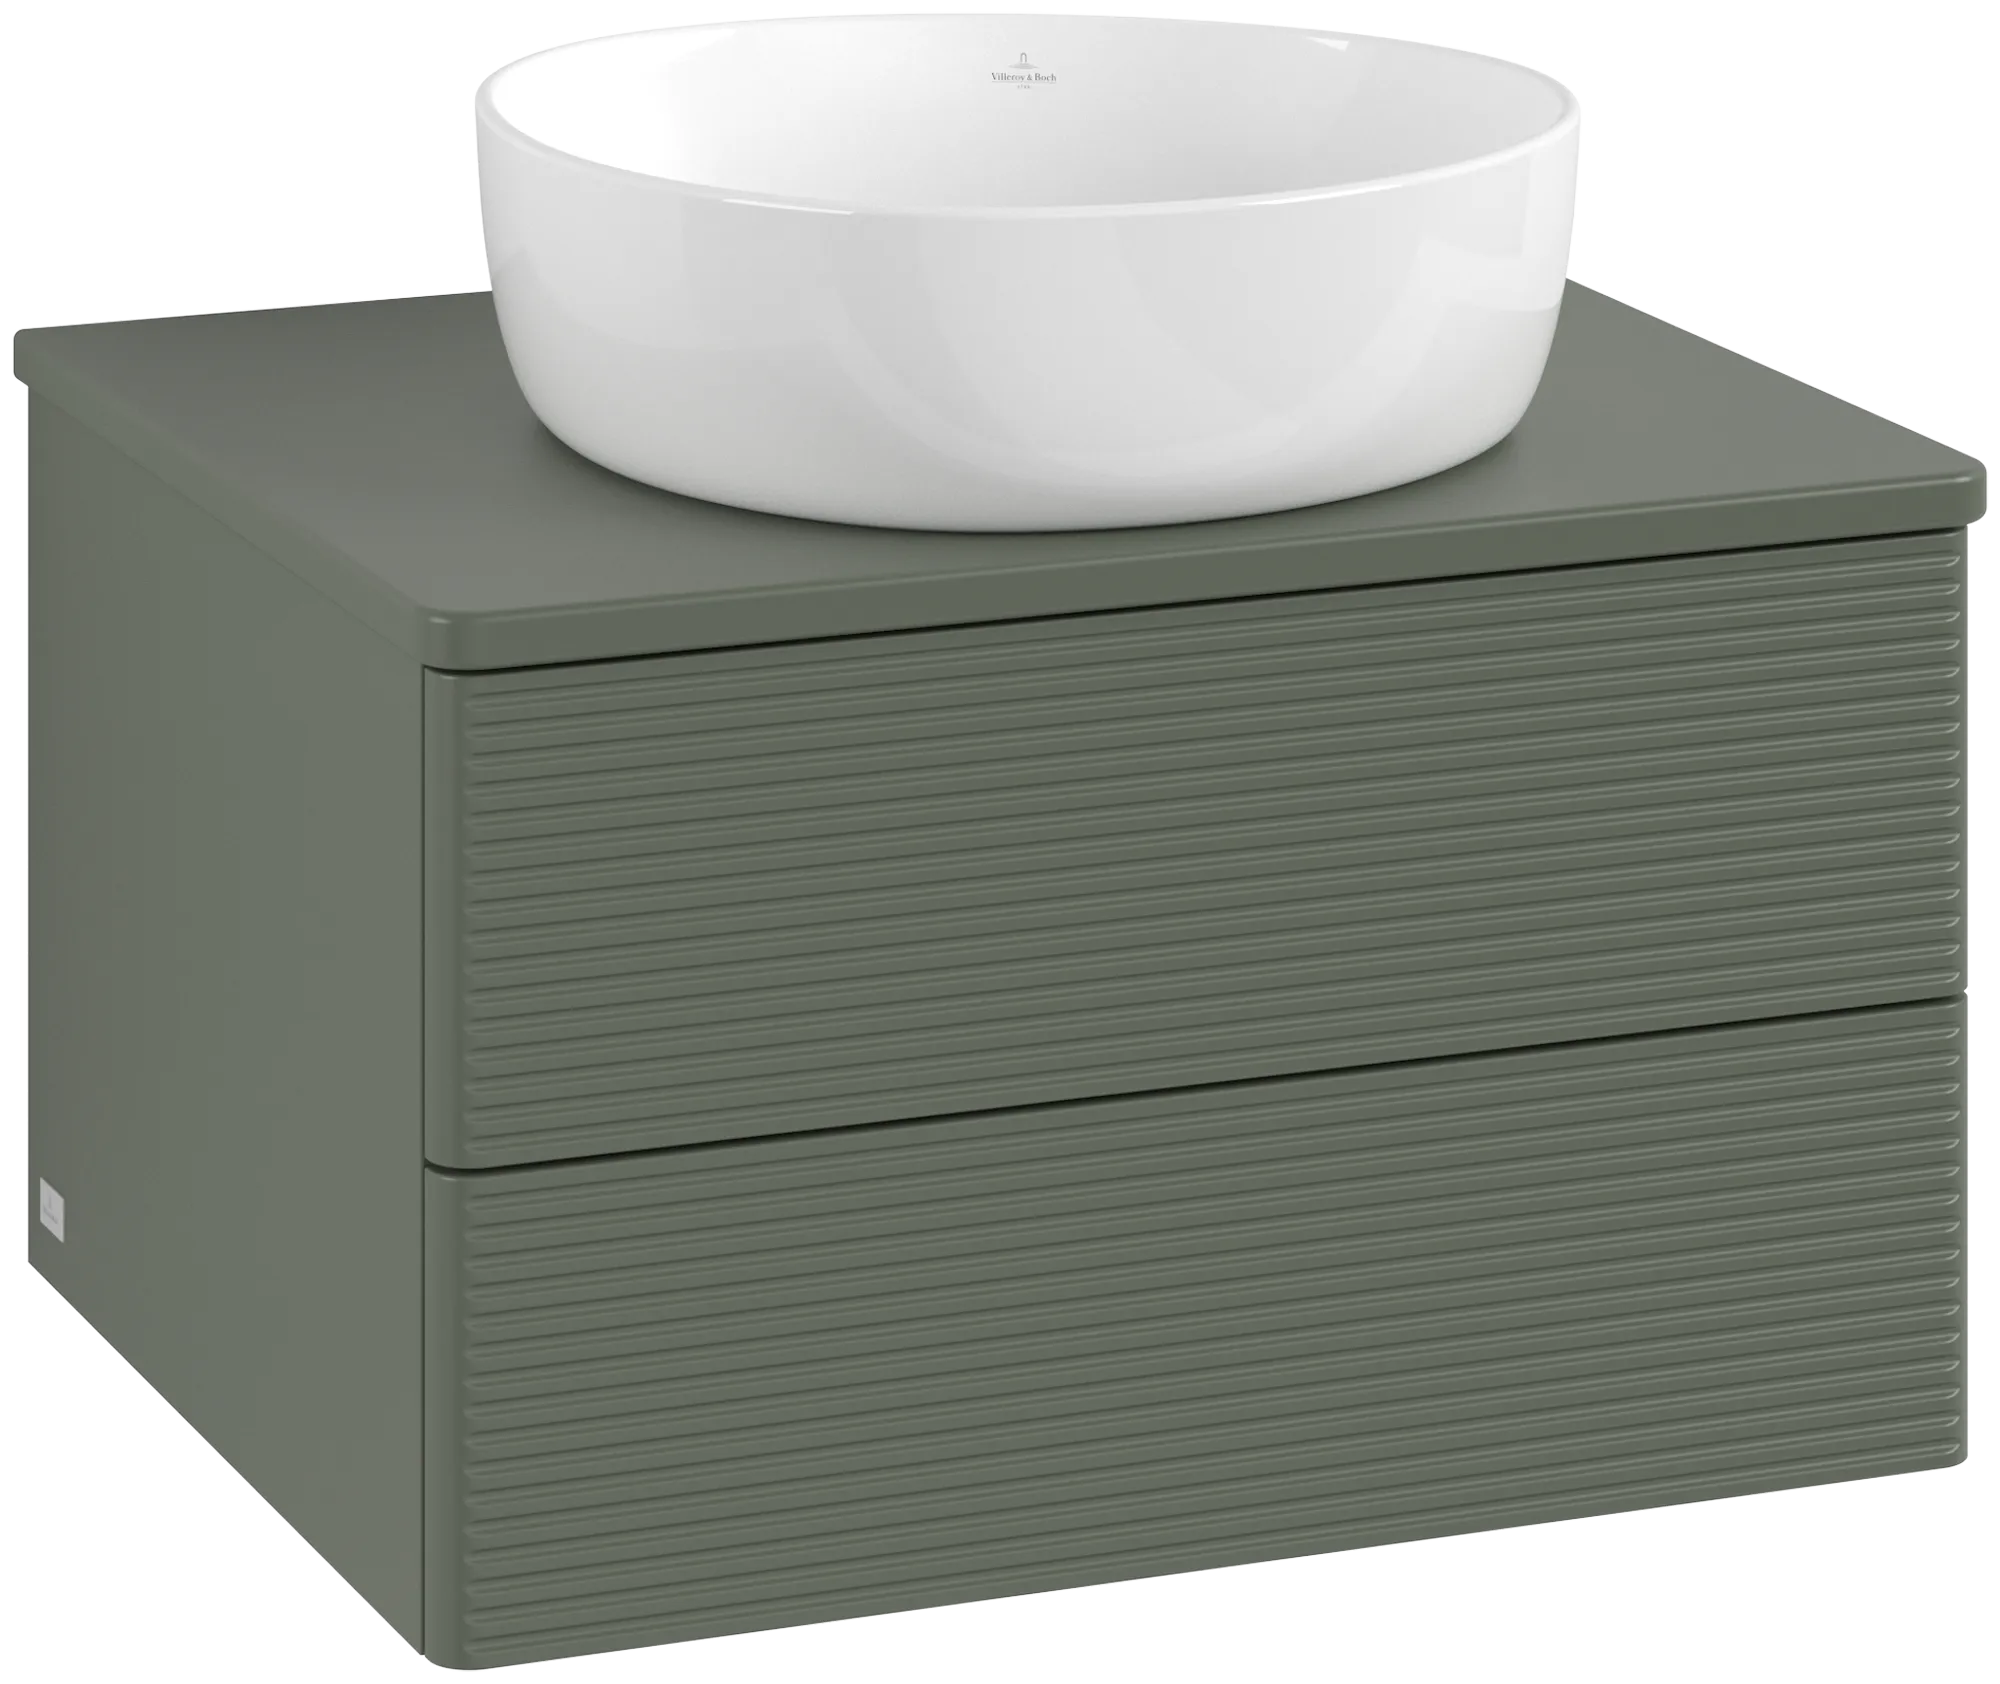 Picture of VILLEROY BOCH Antao Vanity unit, with lighting, 2 pull-out compartments, 600 x 360 x 500 mm, Front with grain texture, Leaf Green Matt Lacquer / Leaf Green Matt Lacquer #L18150HL